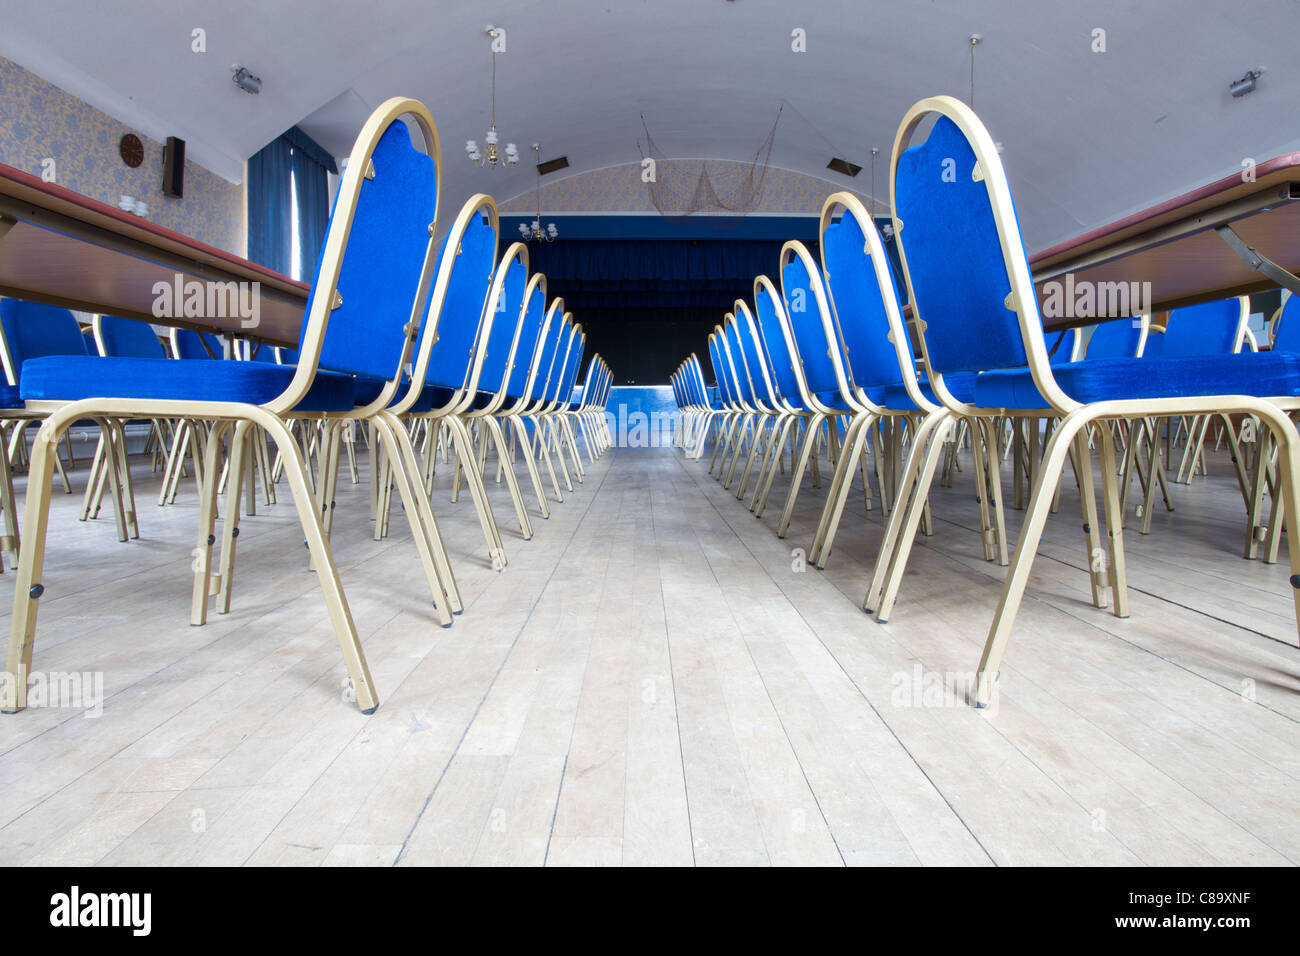 Chairs lined up neatly in the Miners Welfare Club in Horden, County Durham, England Stock Photo